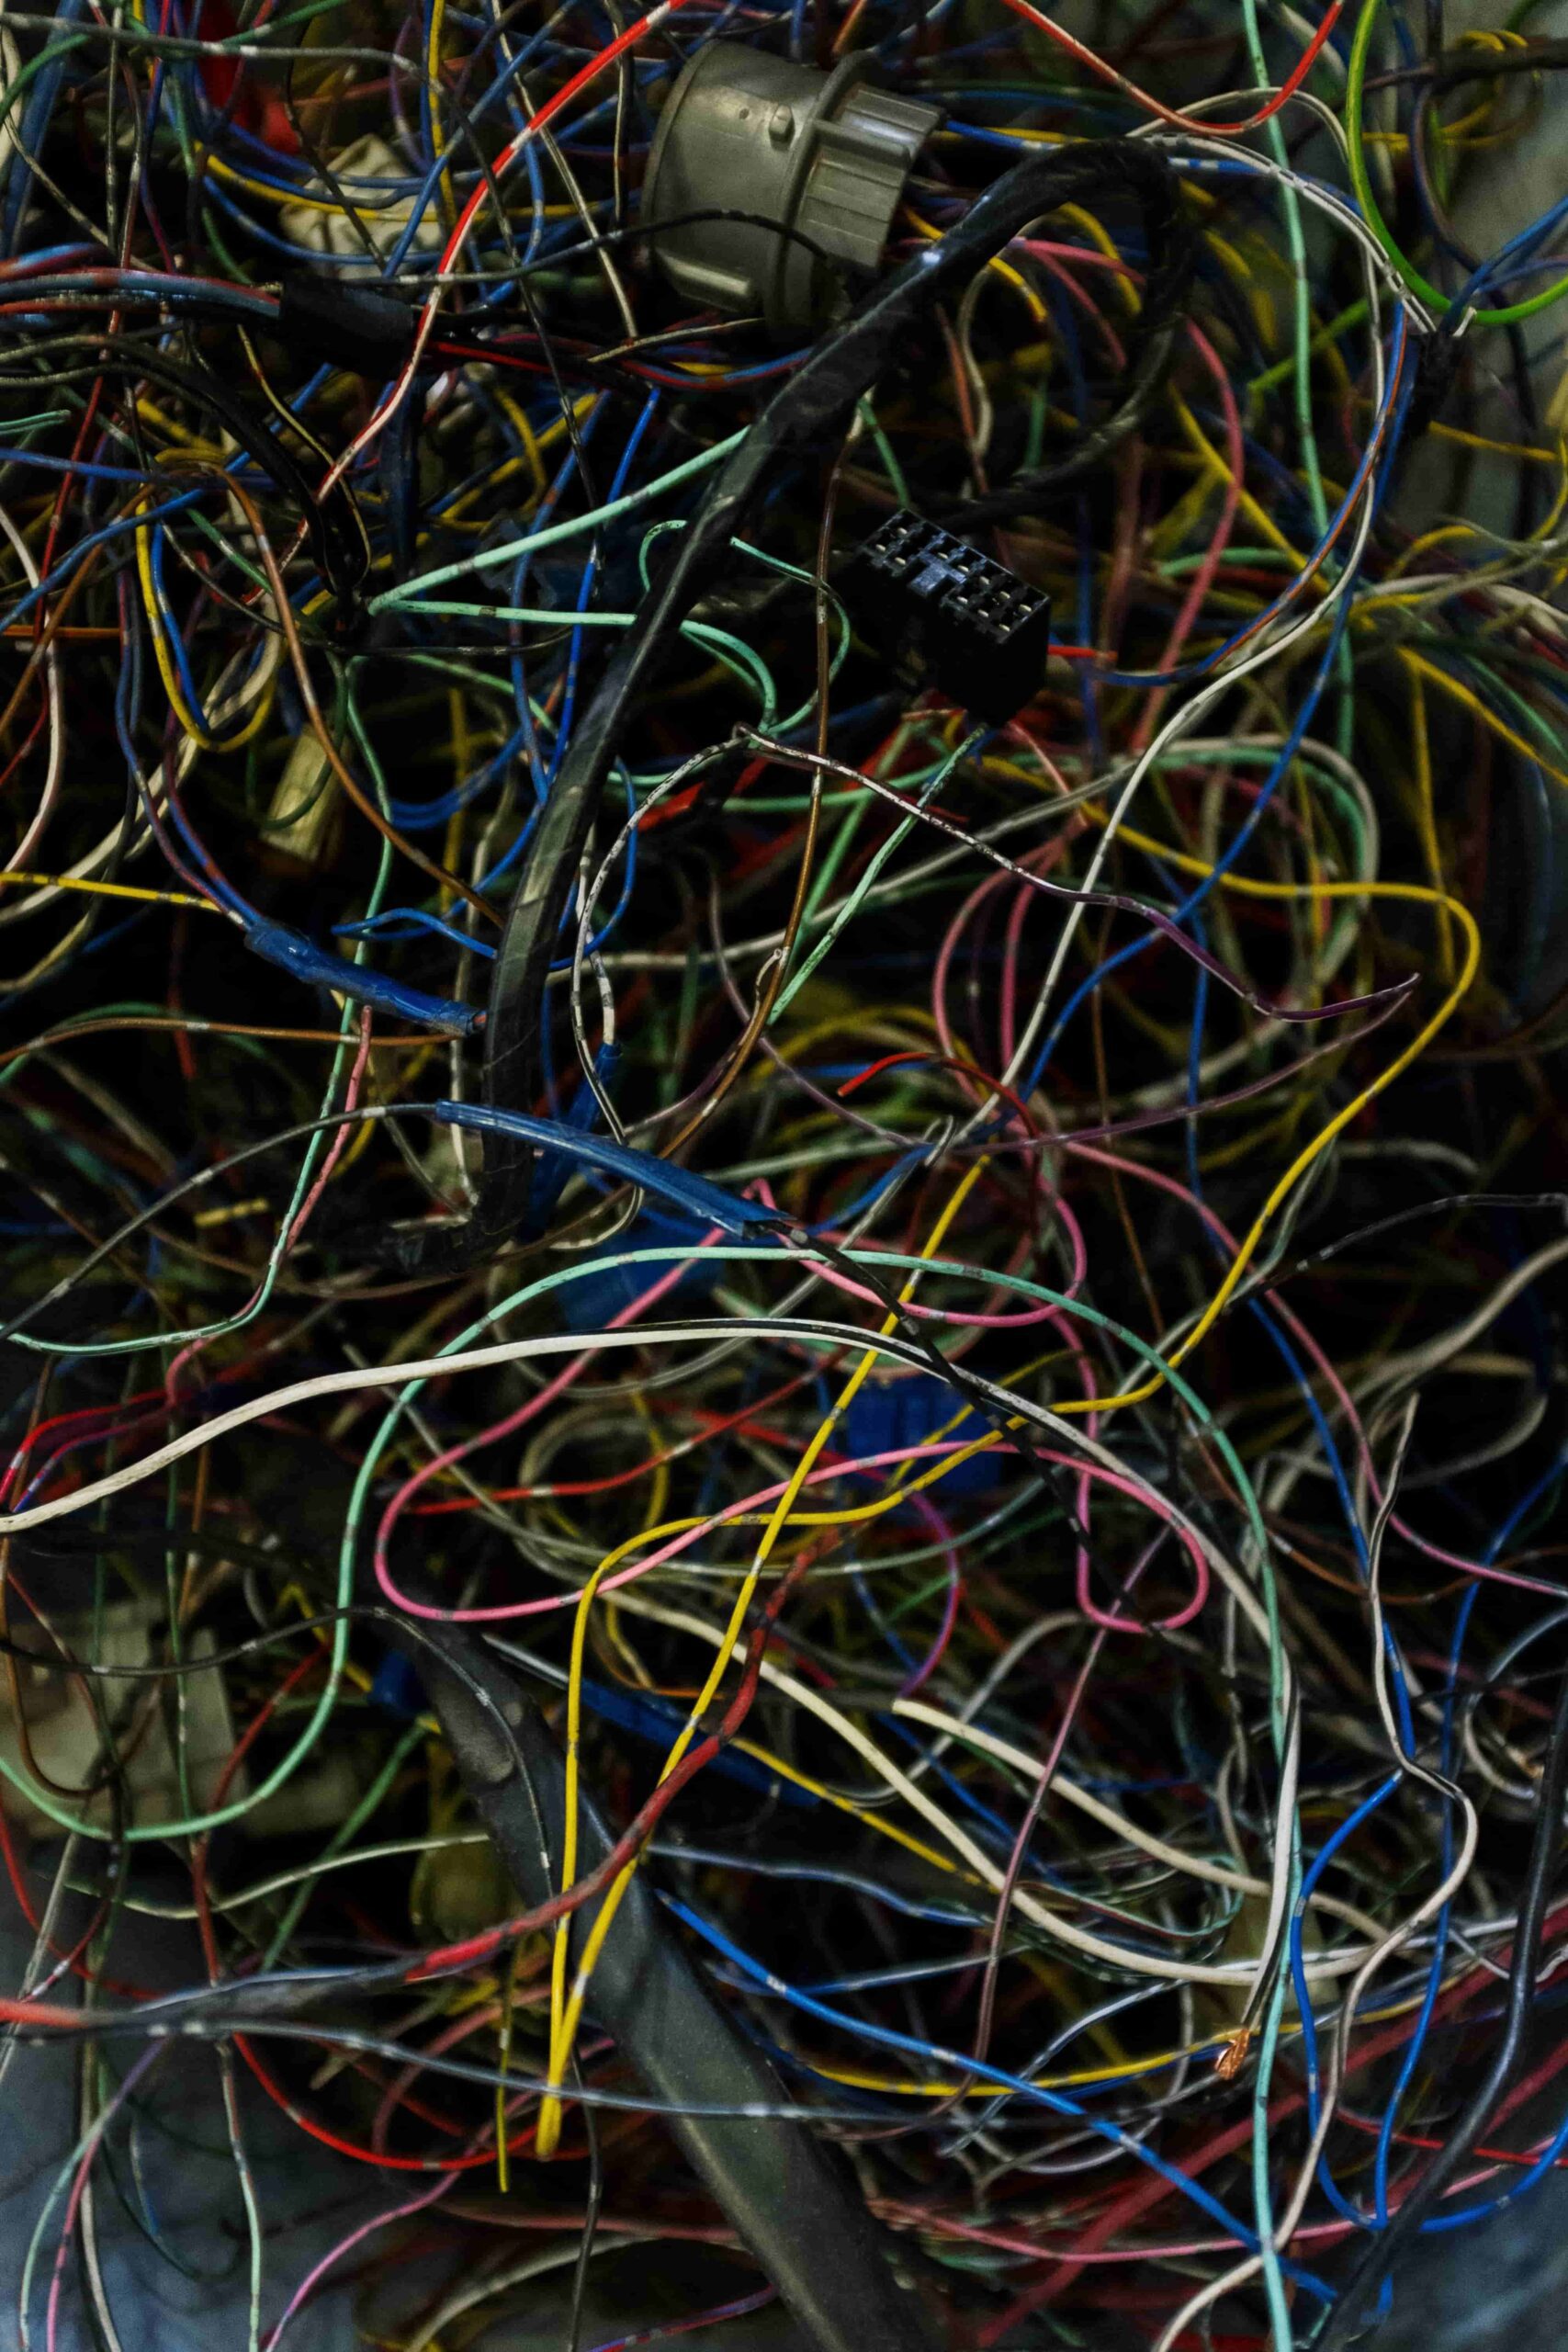 A jumble of overlapping electrical wires